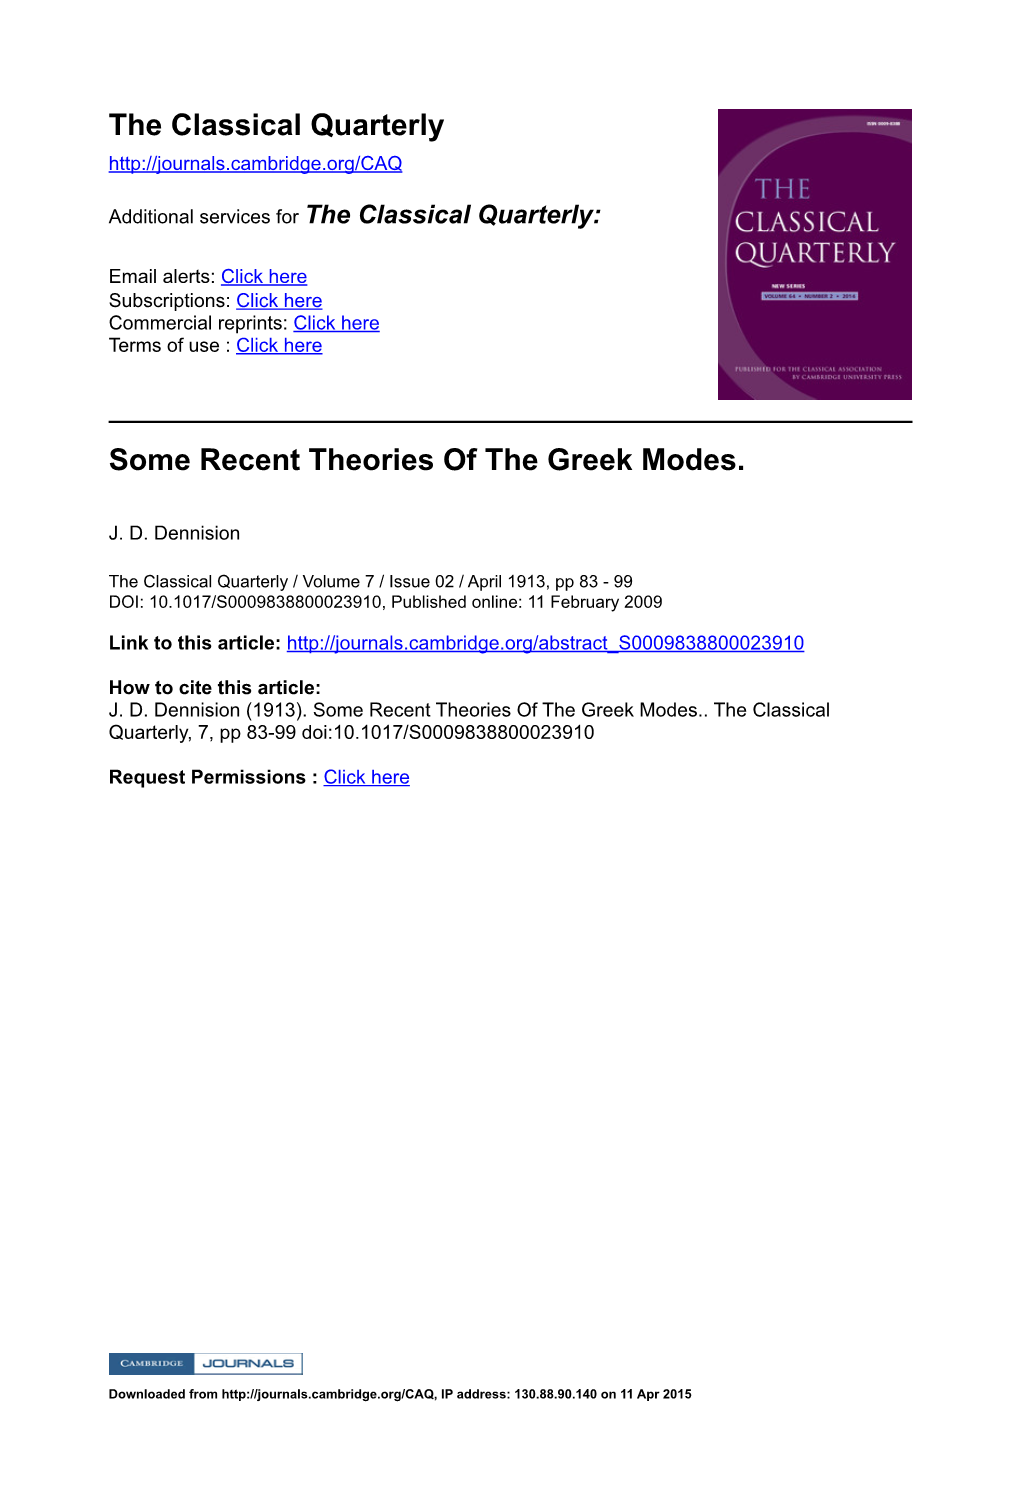 Some Recent Theories of the Greek Modes